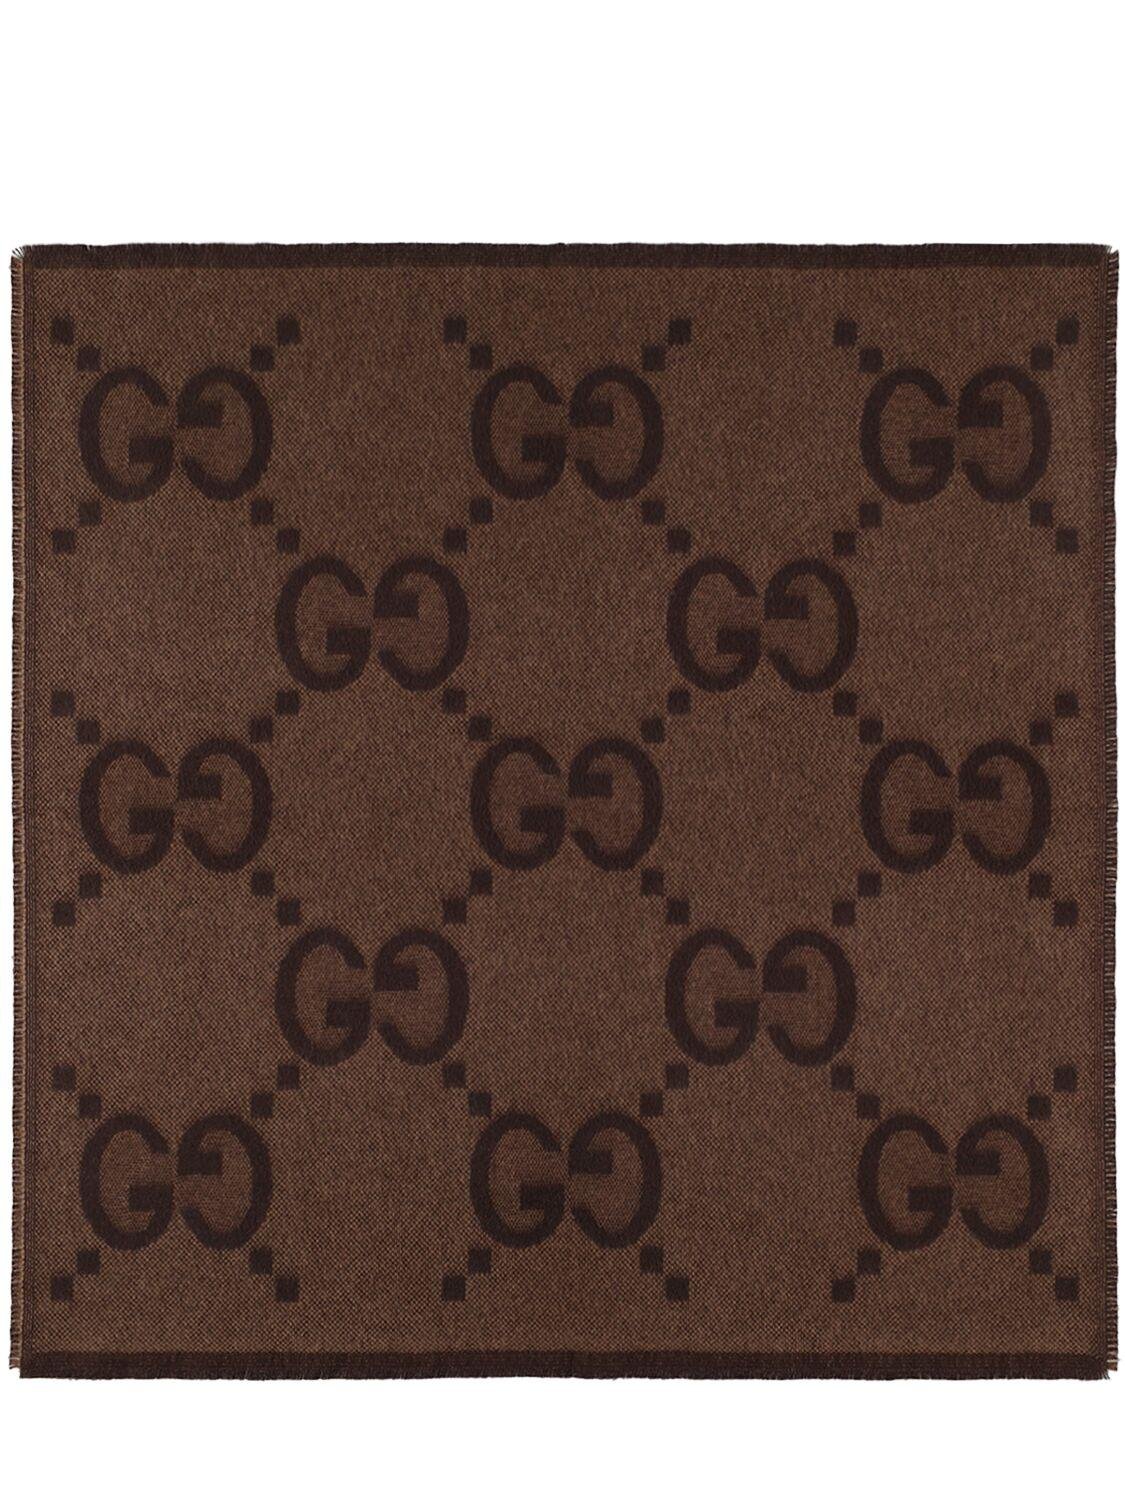 Gg Cotton Jacquard Blanket by GUCCI